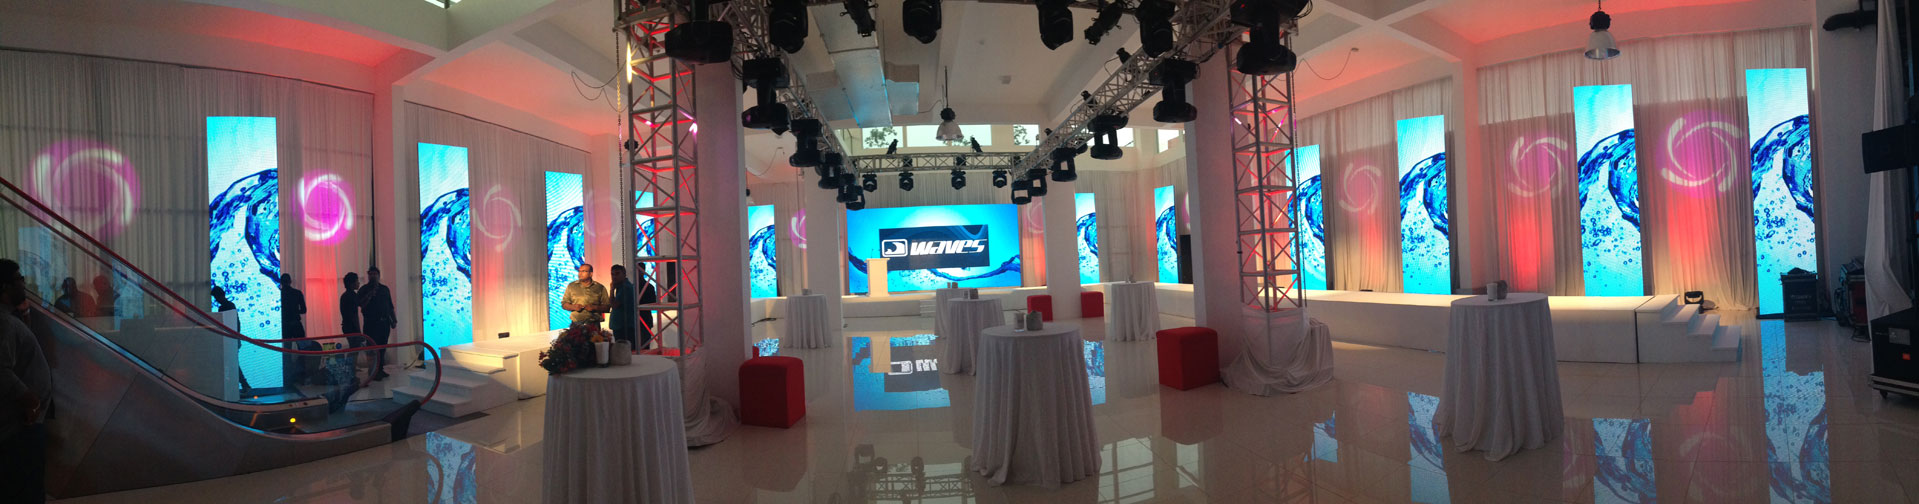 The Application of Transparent LED Display in the Scene